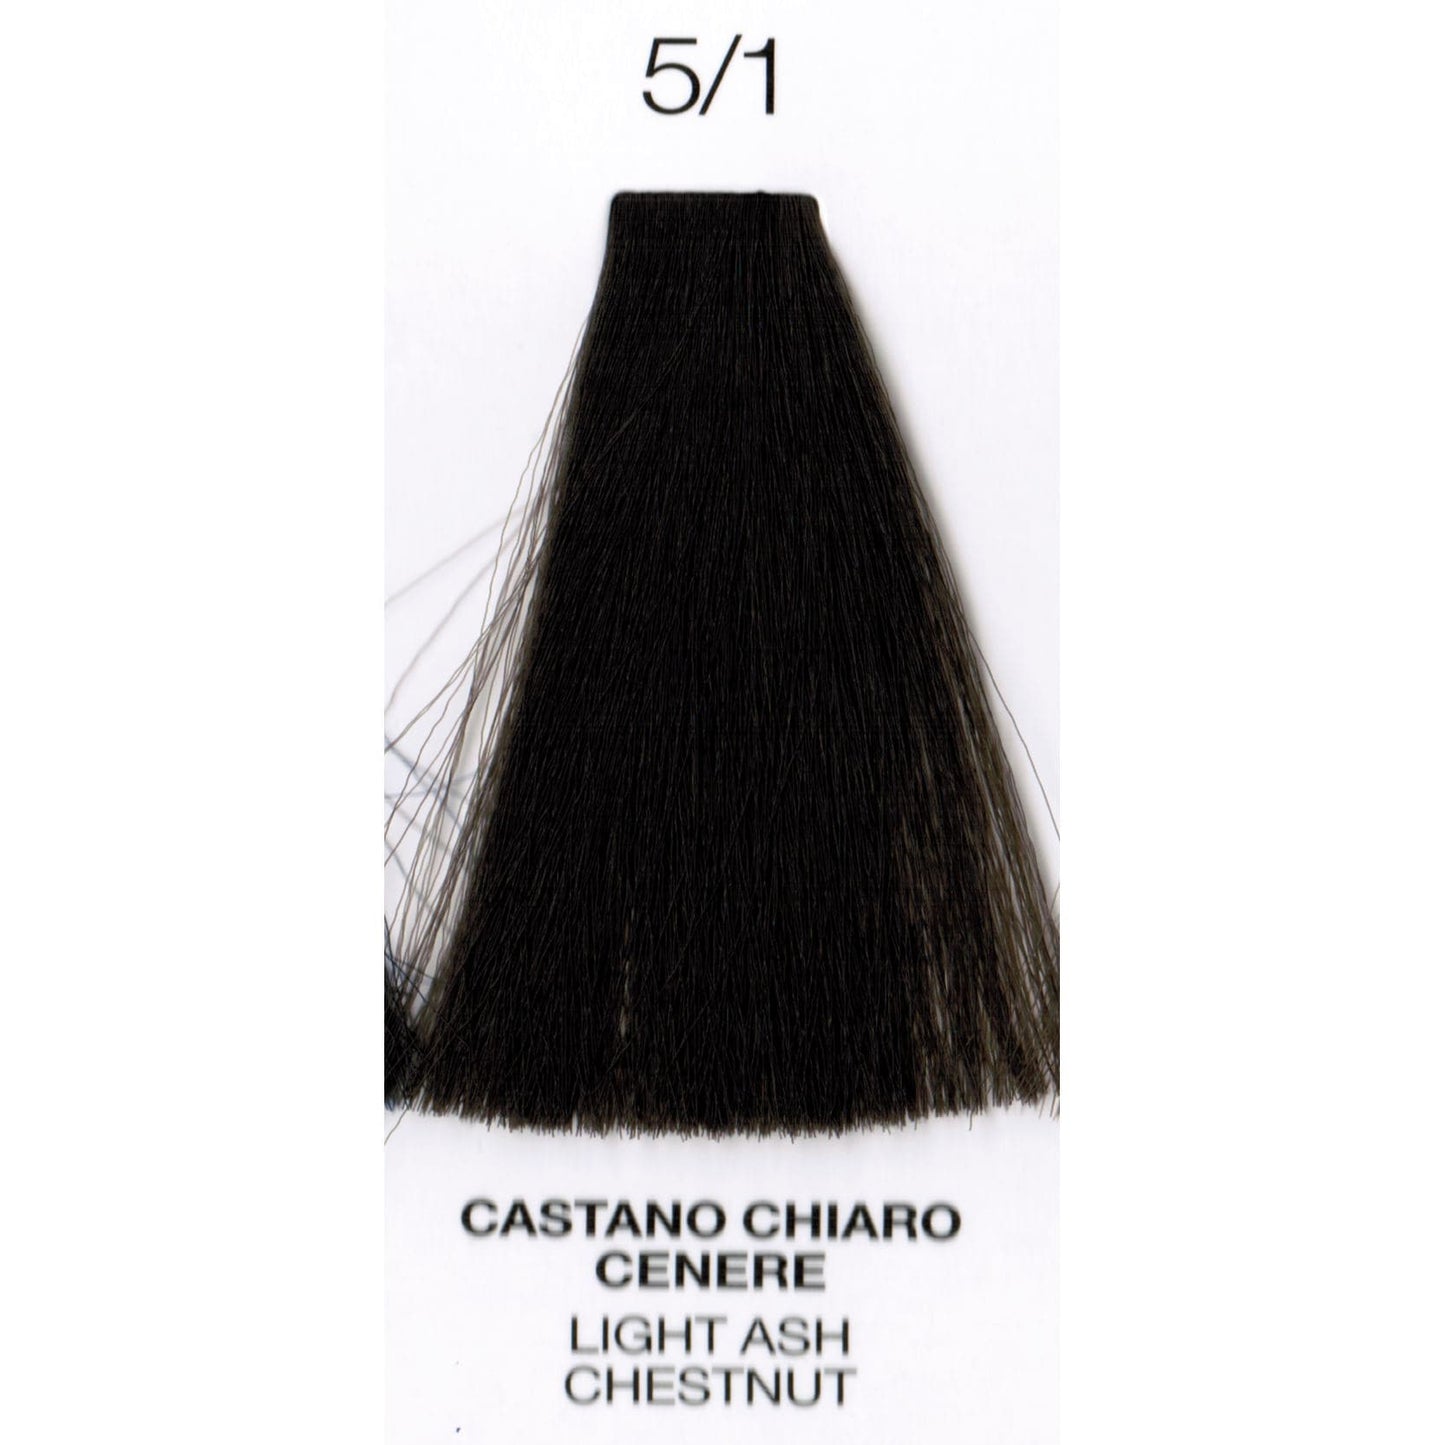 5/1 Light Ash Chestnut | Ammonia-Free Permanent Hair Color | Purity | OYSTER - SH Salons